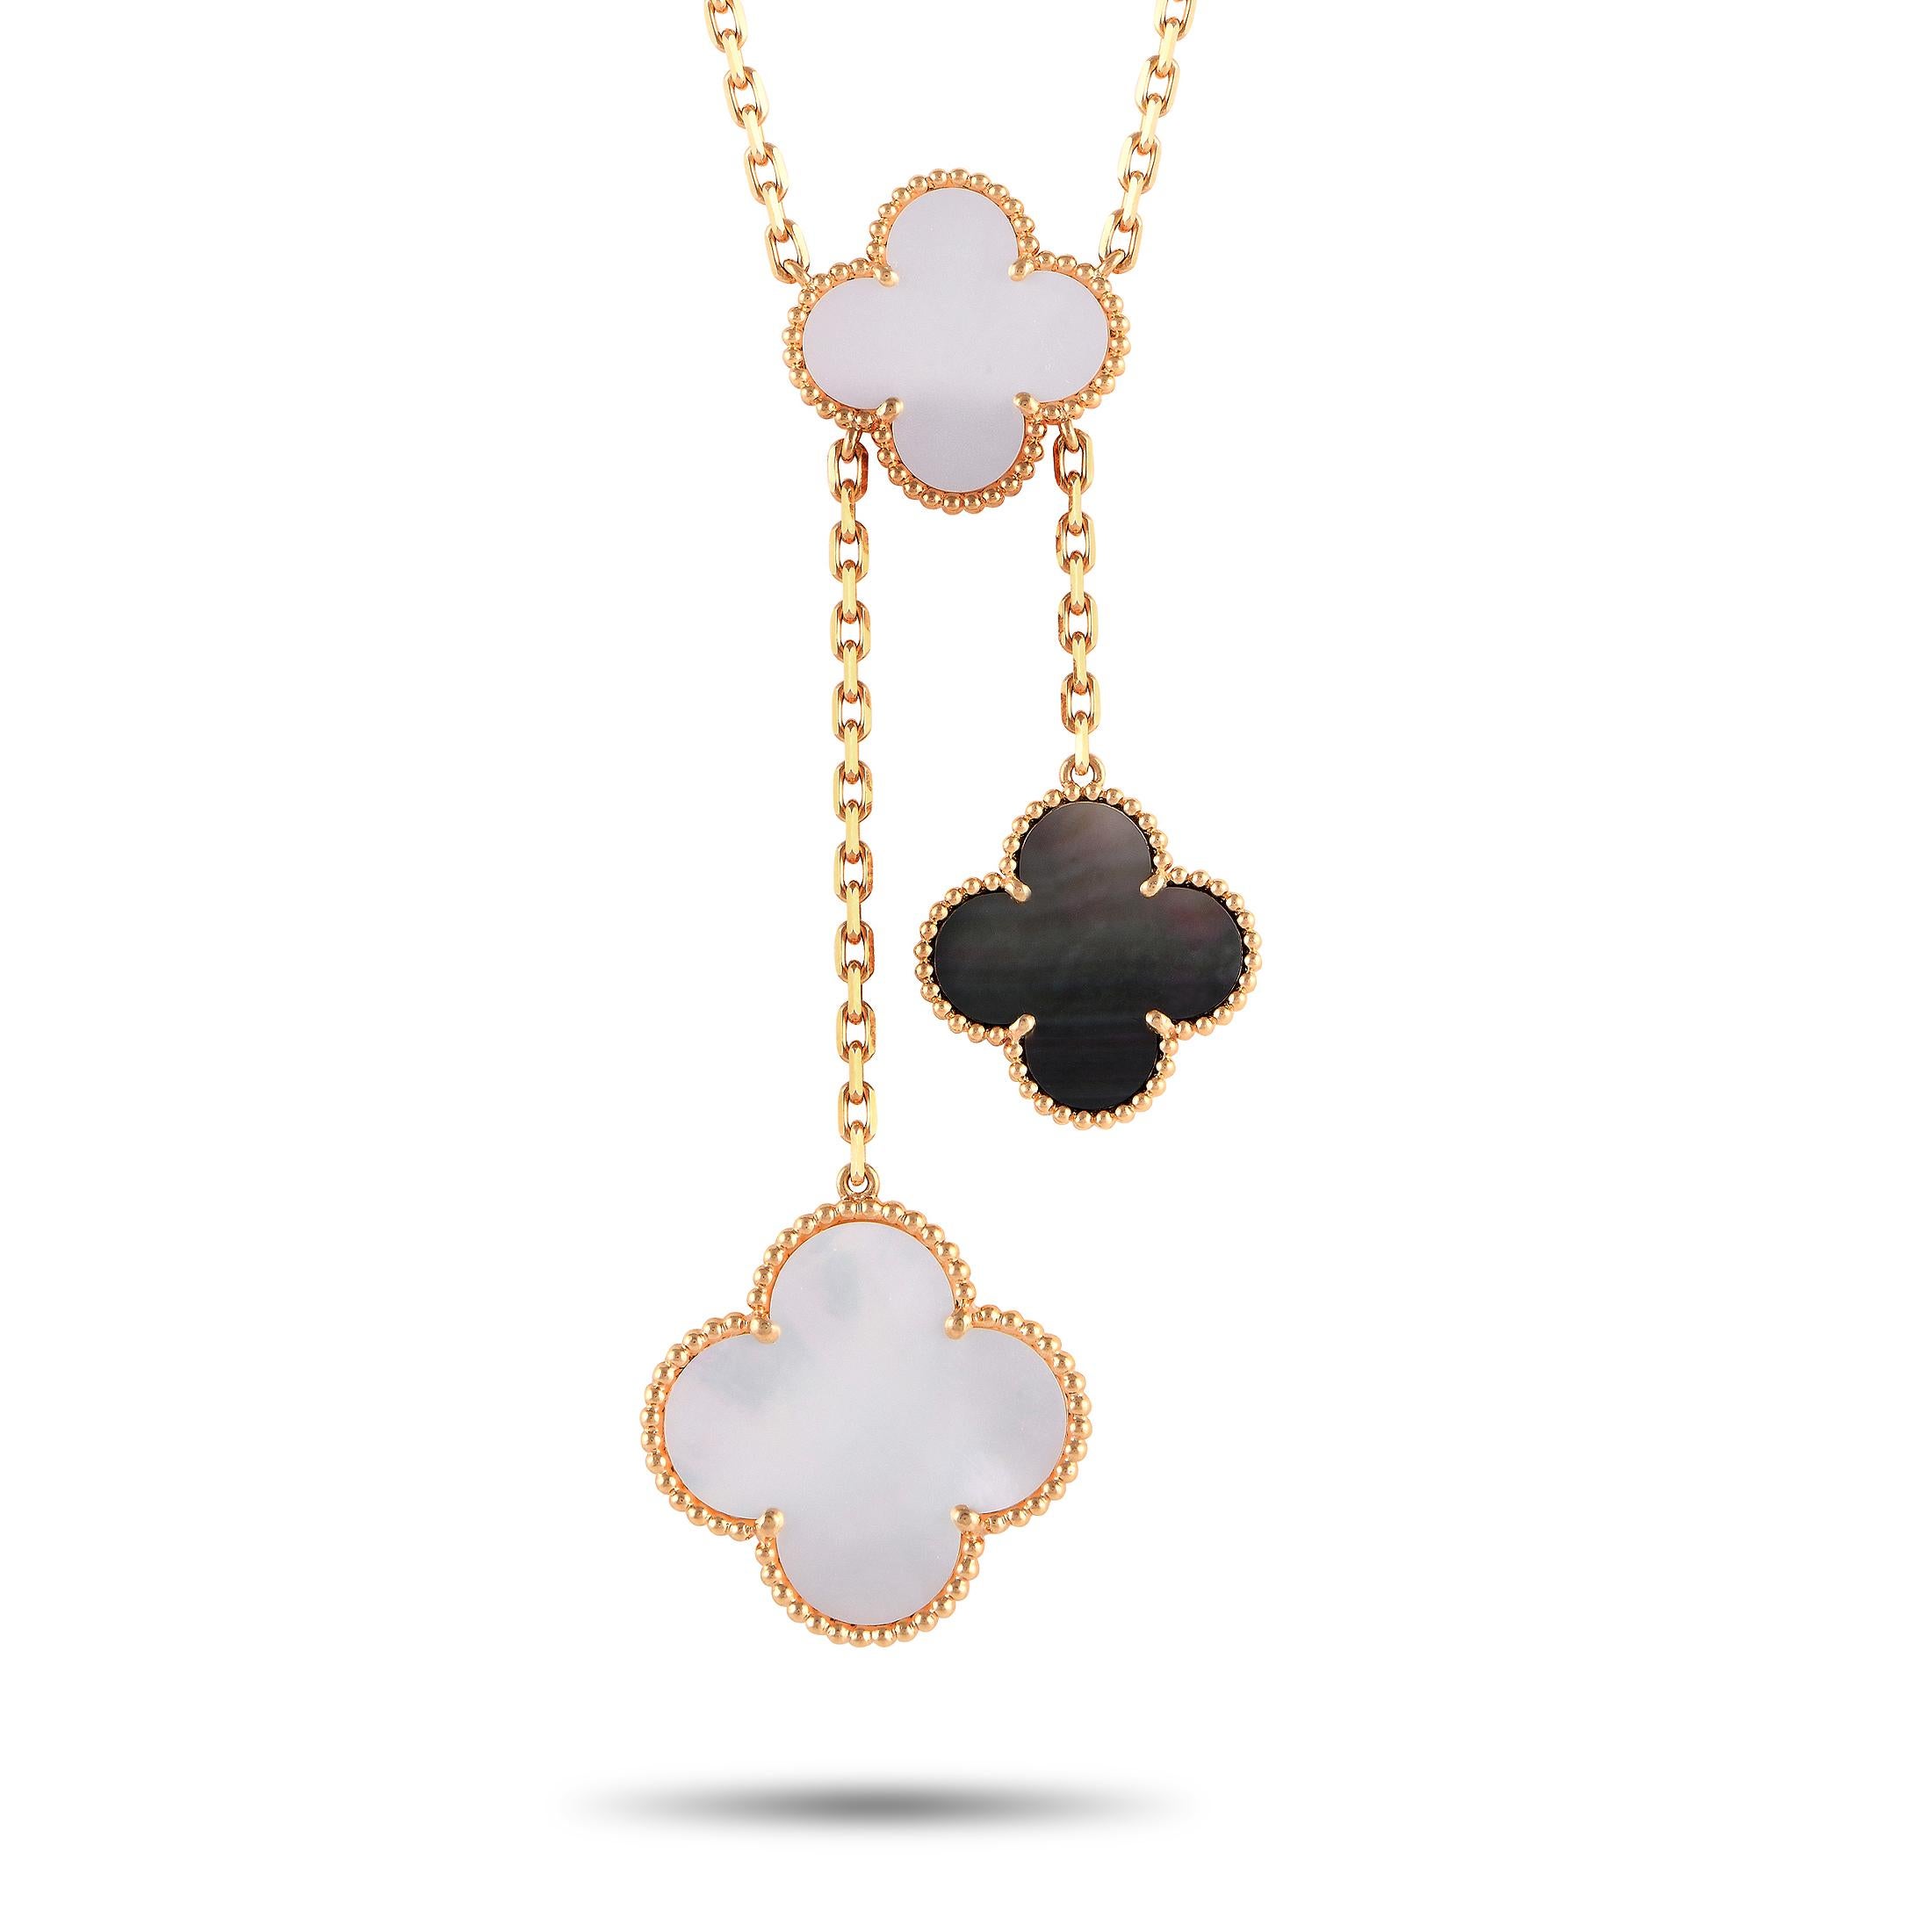 This Van Cleef & Arpels Magic Alhambra 6-Motif necklace is ready to put a fabulous finishing touch on any ensemble. A series of six iconic clover-shaped motifs accented by Mother of Pearl elevate the 16.0” chain, which also features a 3.5” long